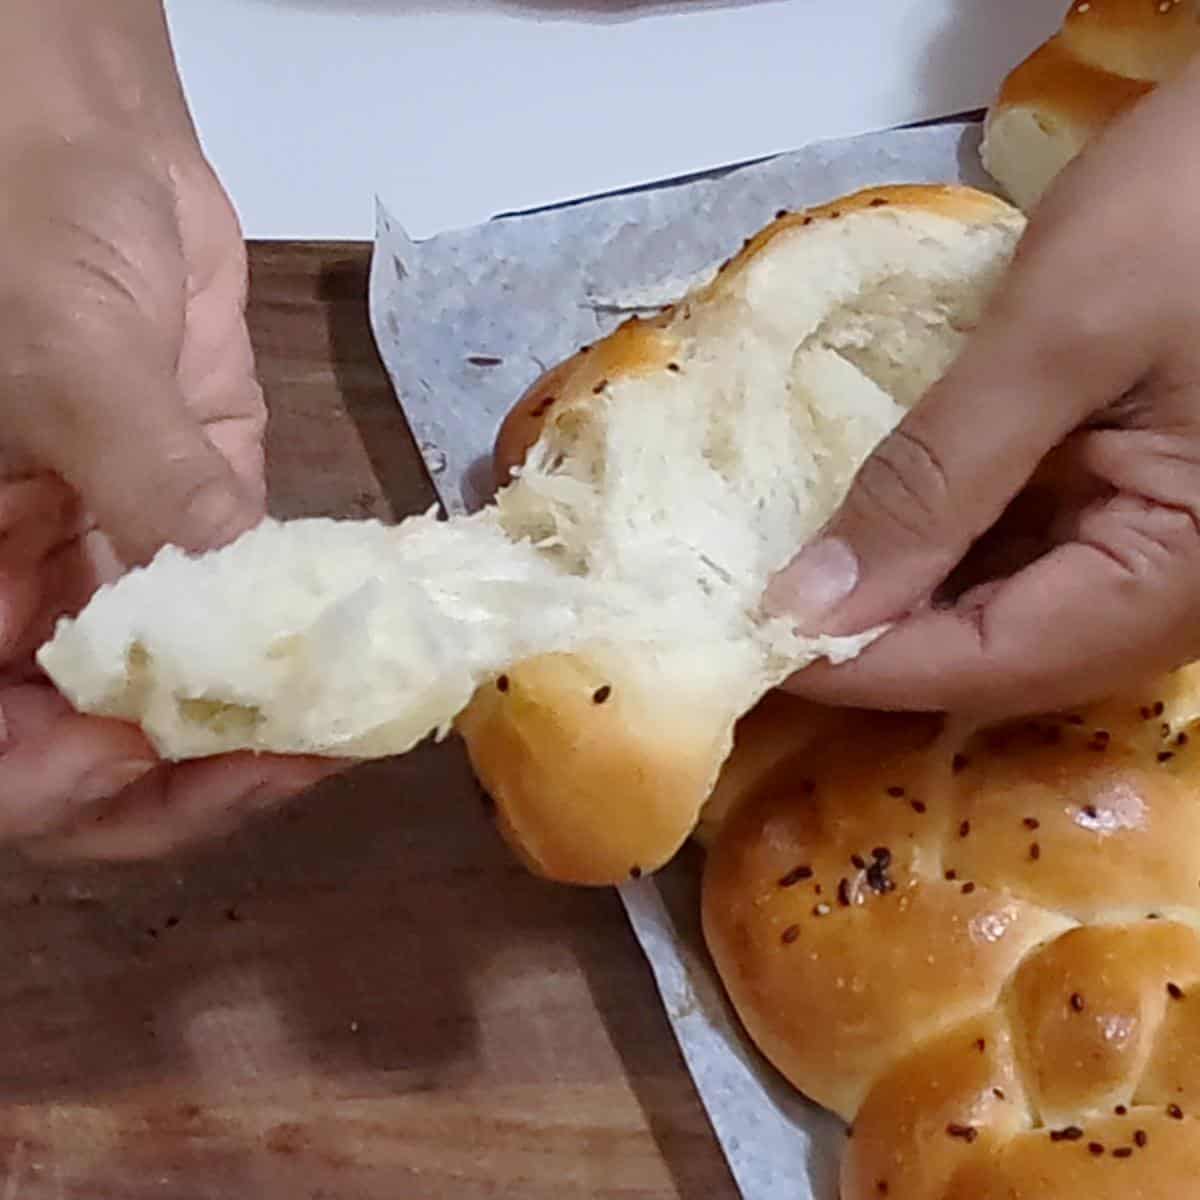 Showing the inside of the soft and fluffy challah.